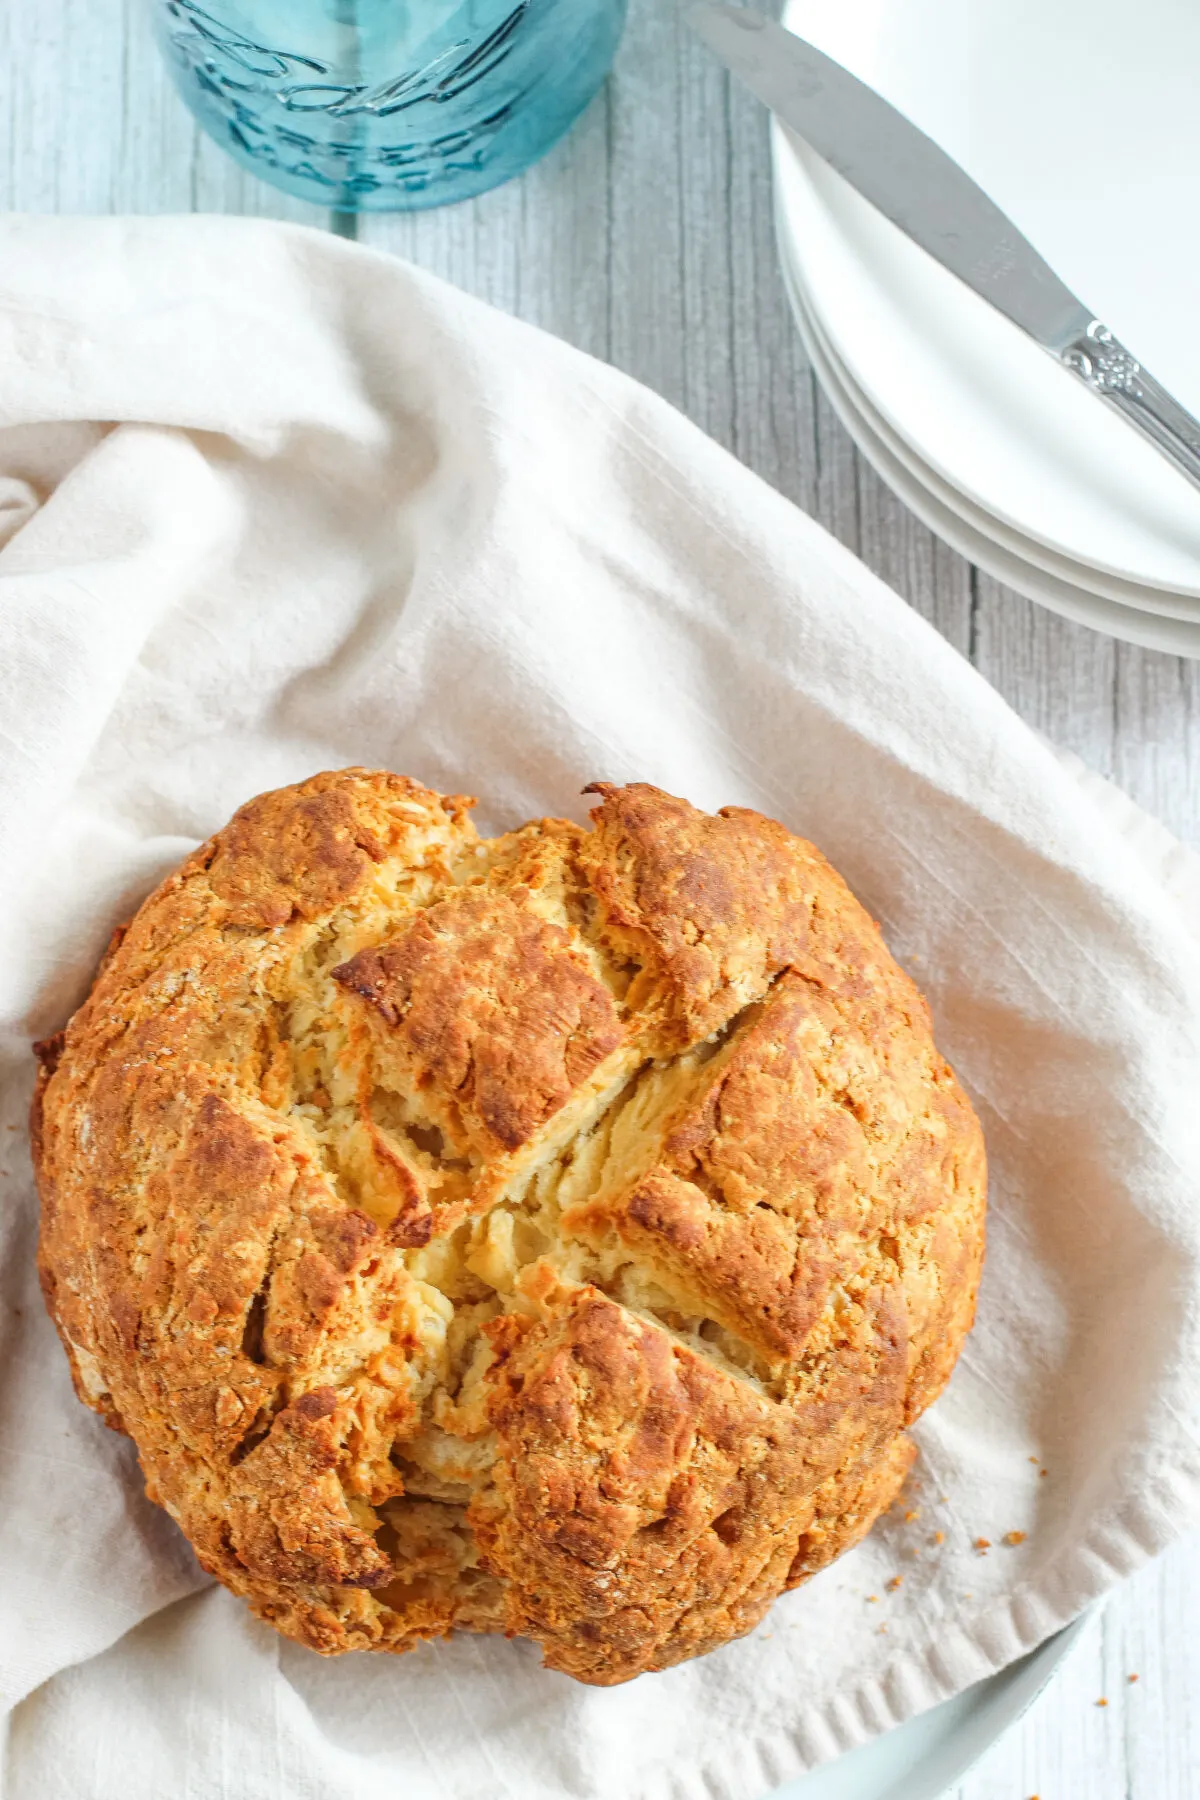 Bring a touch of Ireland to your kitchen with this gluten free Irish soda bread recipe. Perfect for St. Patrick's Day or anytime!